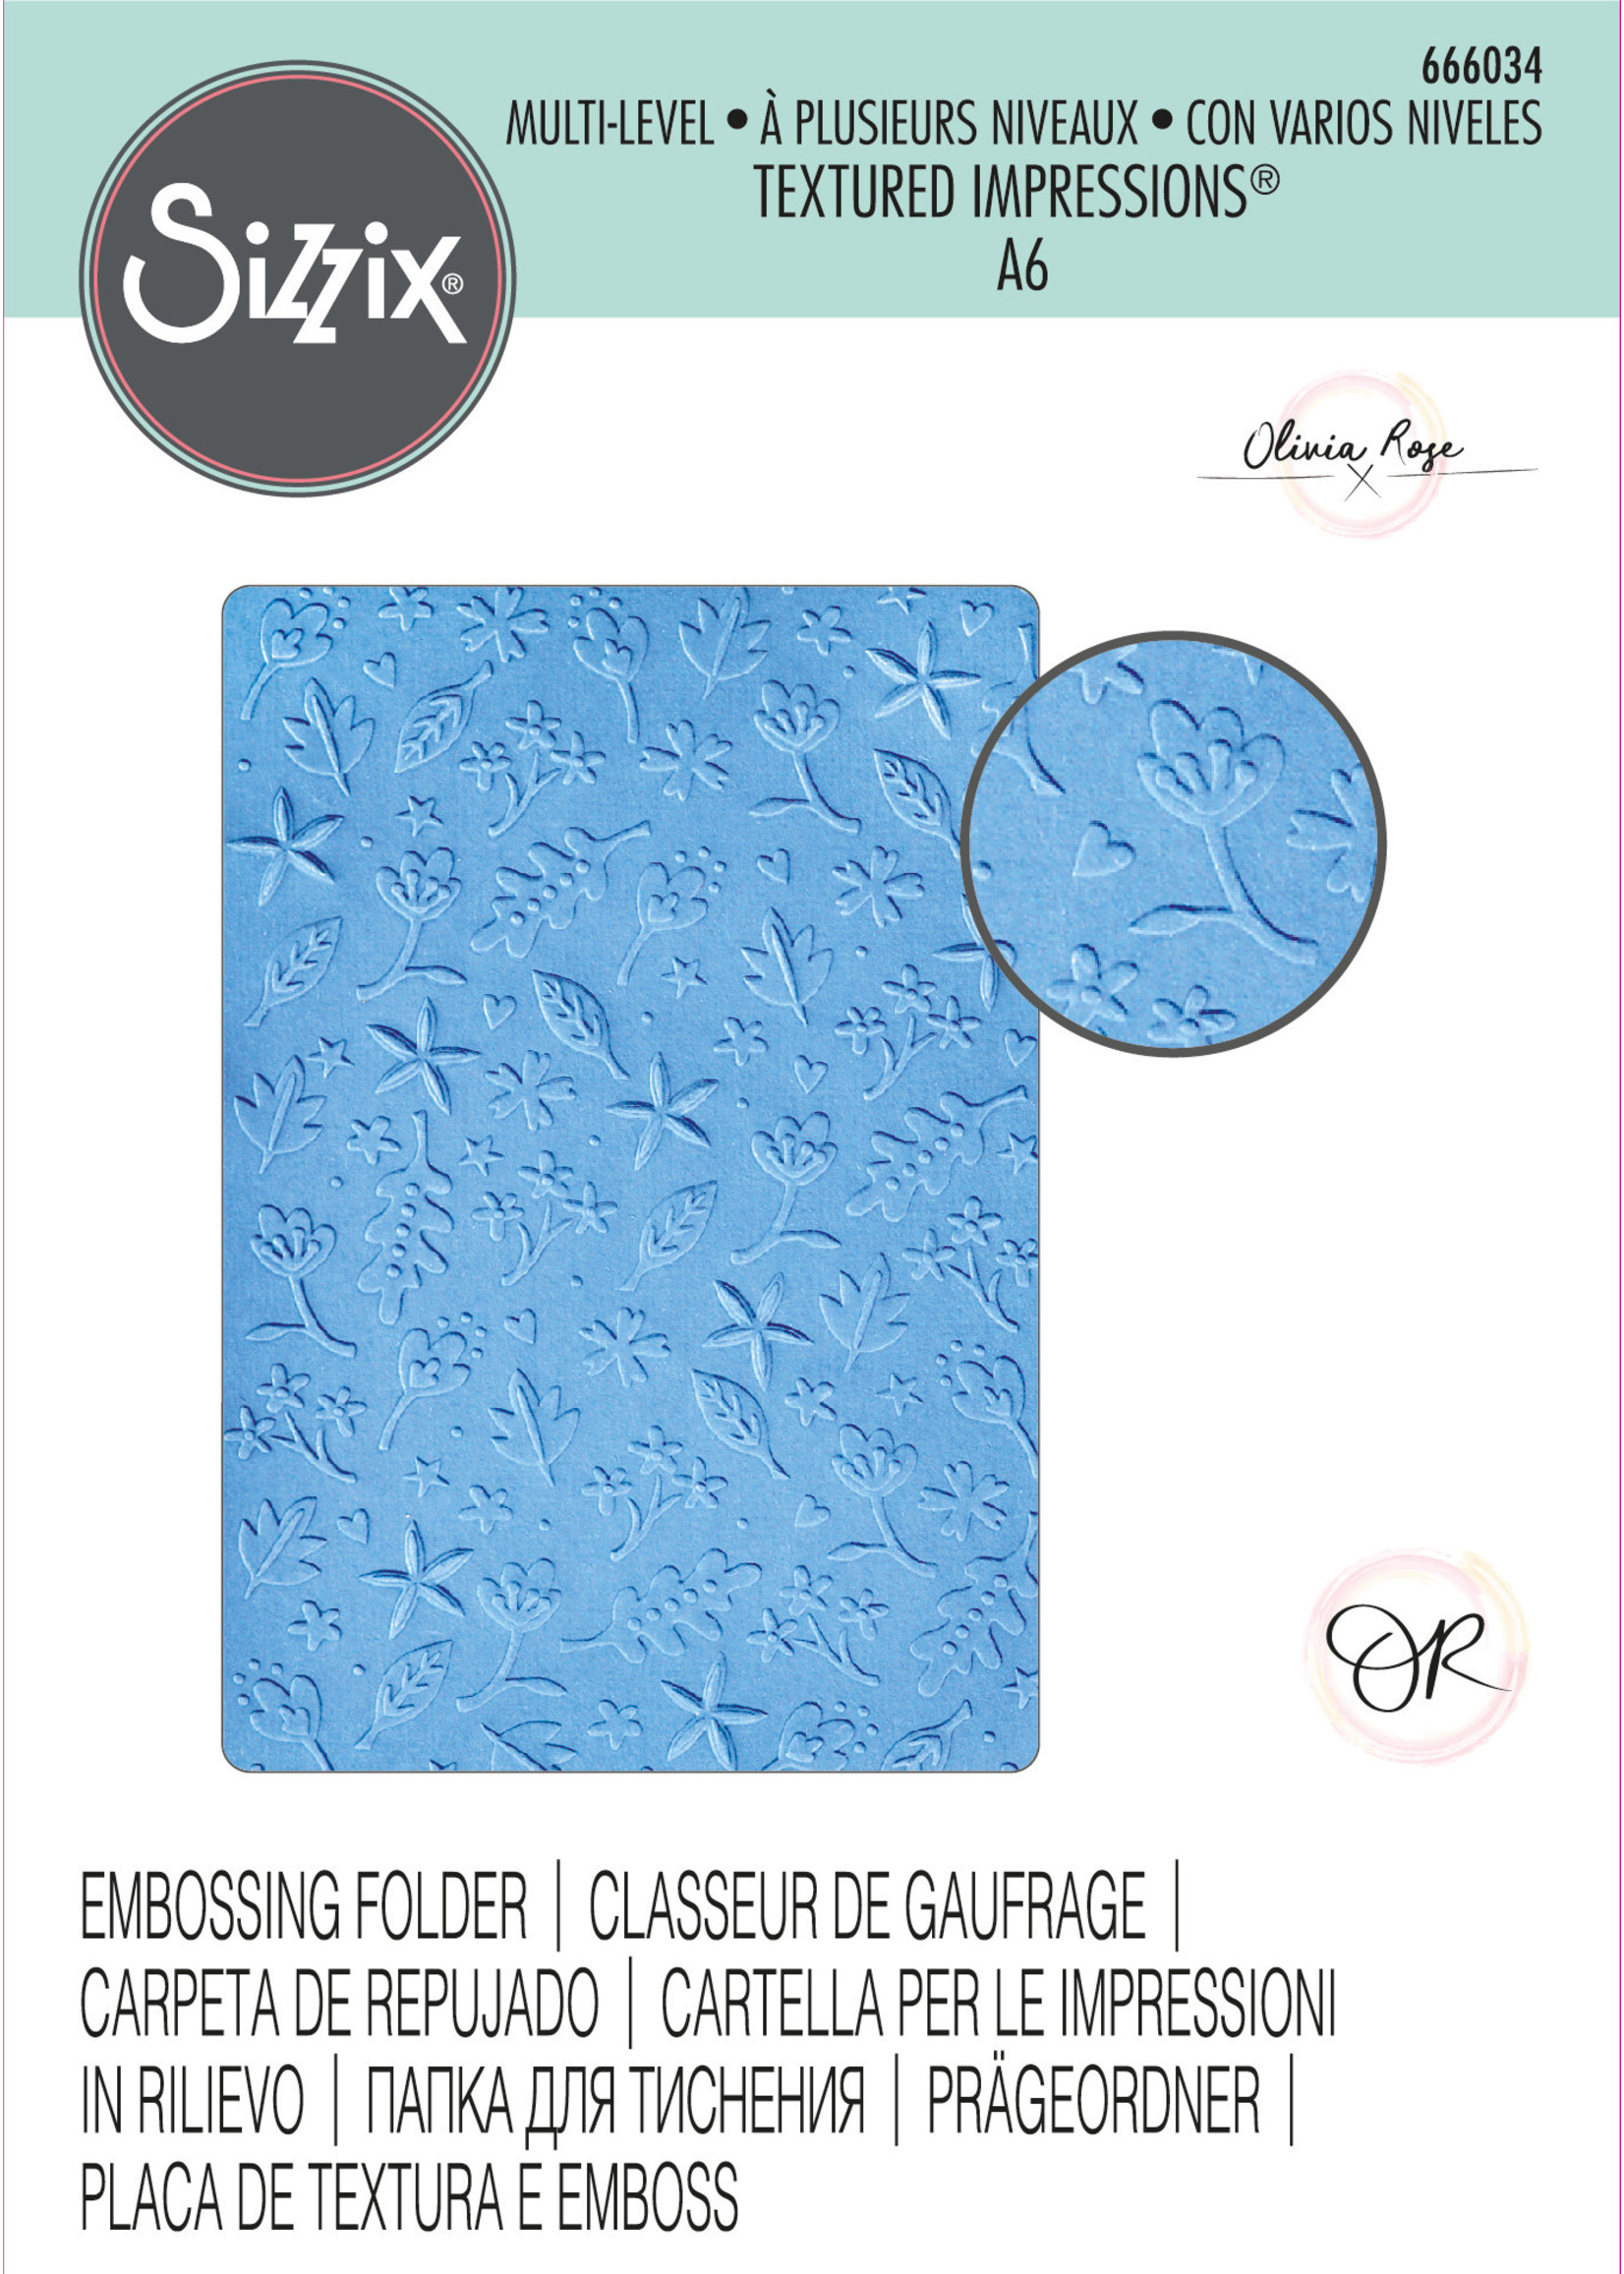 Sizzix Sizzix® Multi-Level Textured Impressions® Embossing Folder - Drifting Leaves by Olivia Rose